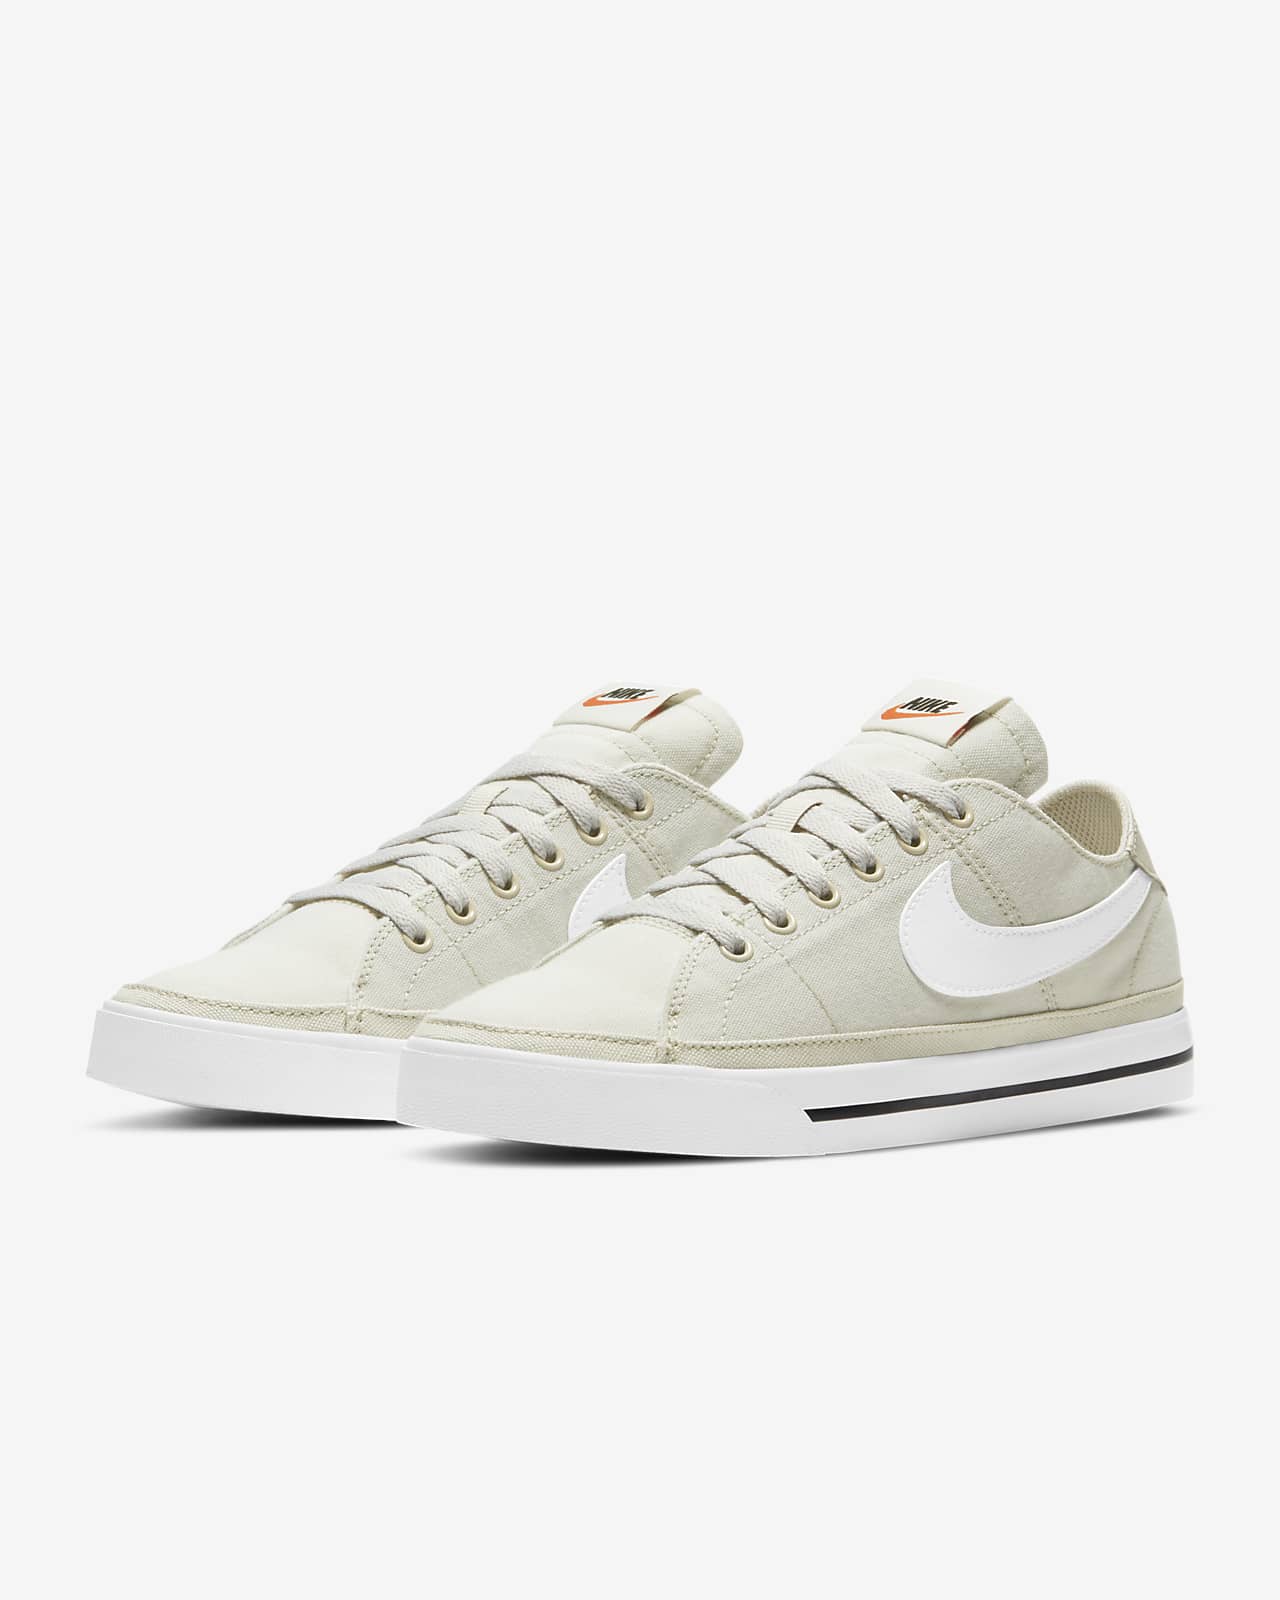 Nike Canvas Shoes, Buy Now, Hotsell, 59% OFF, sportsregras.com